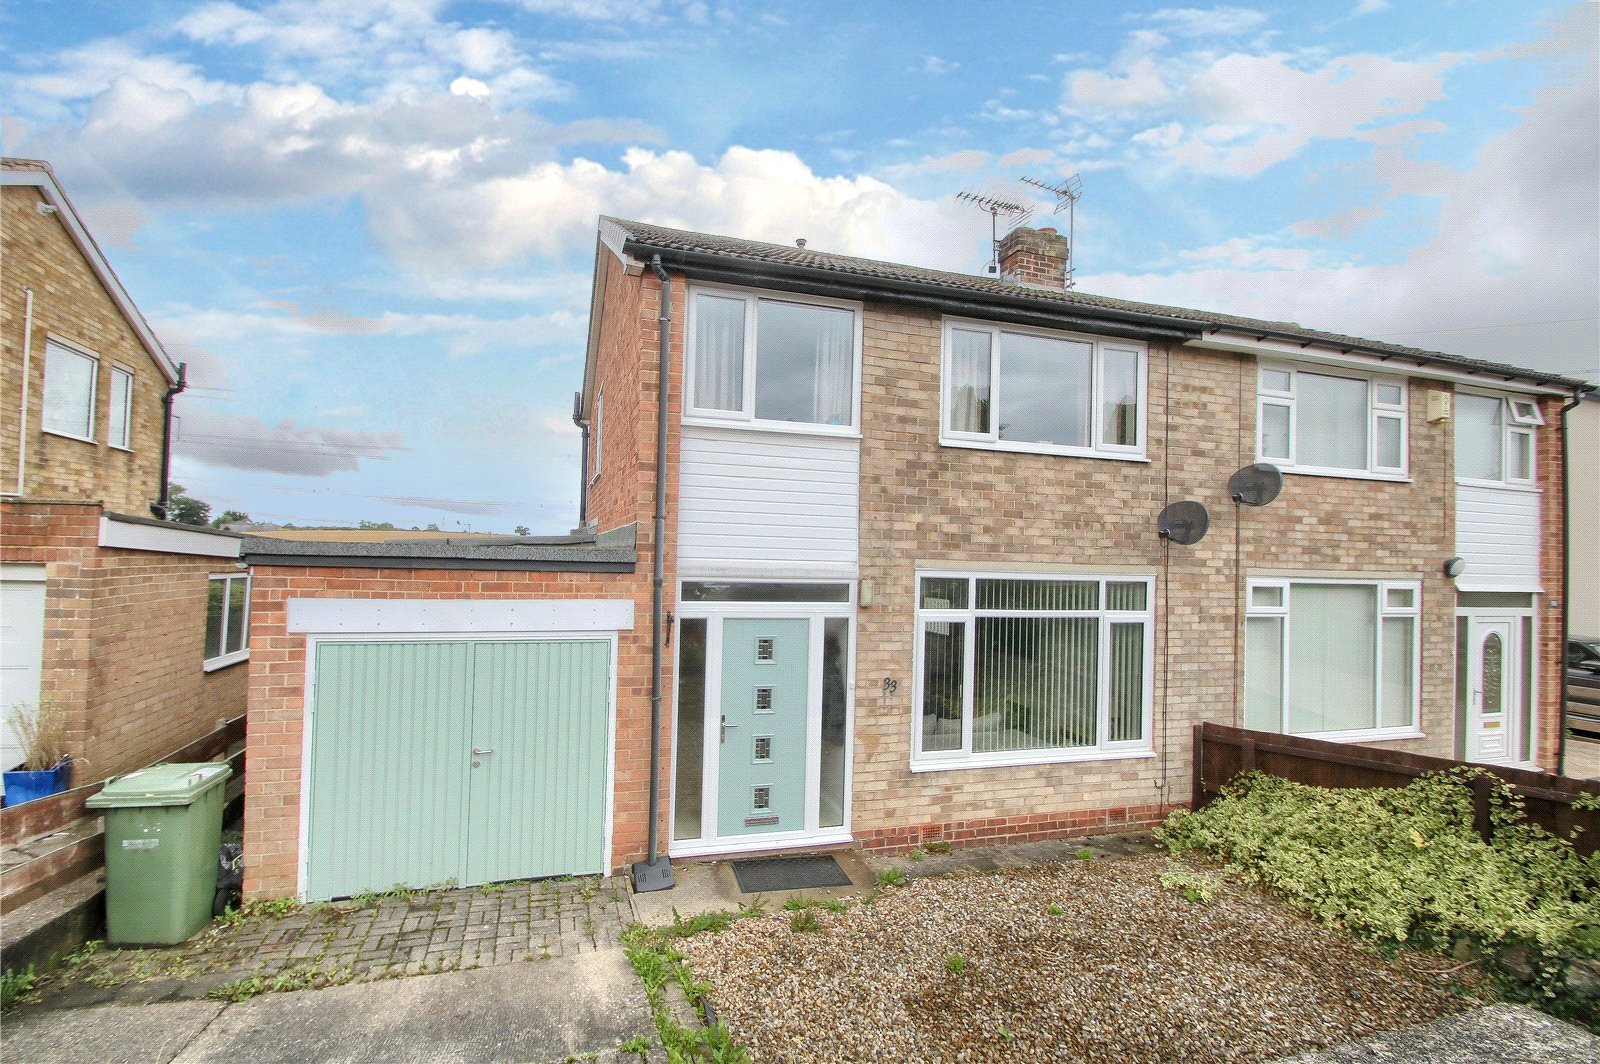 3 bed house for sale in Seymour Drive, Eaglescliffe - Property Image 1